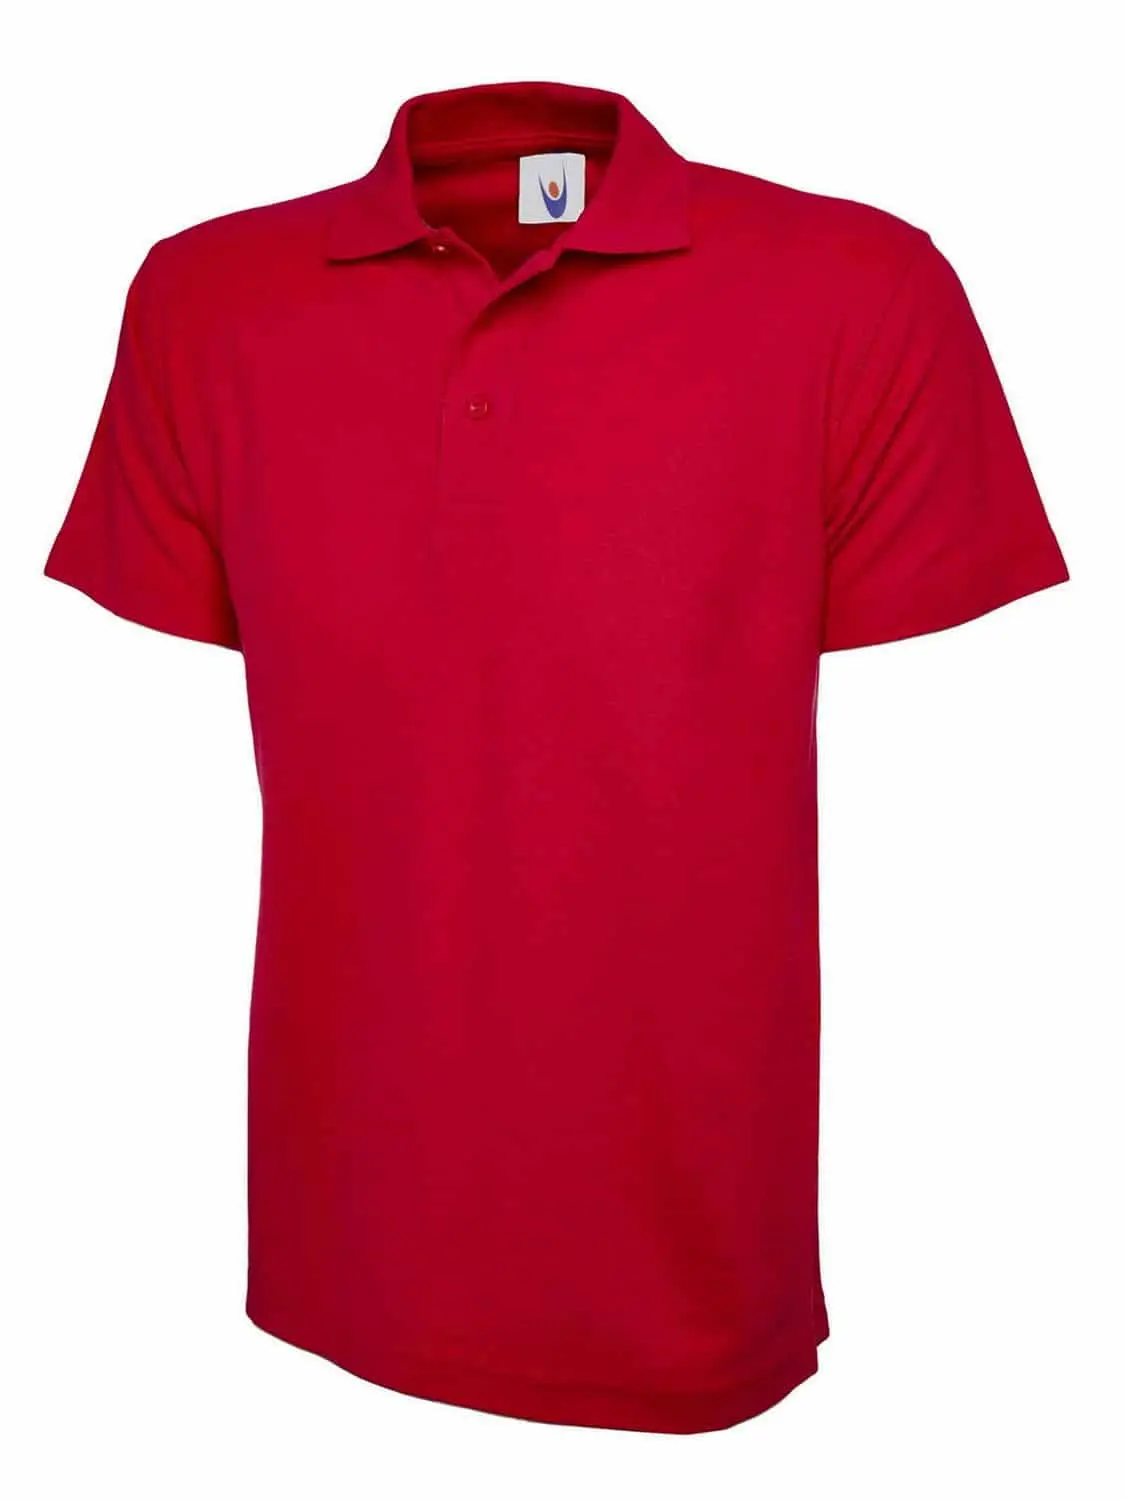 Uneek Classic Polycotton Red UC101